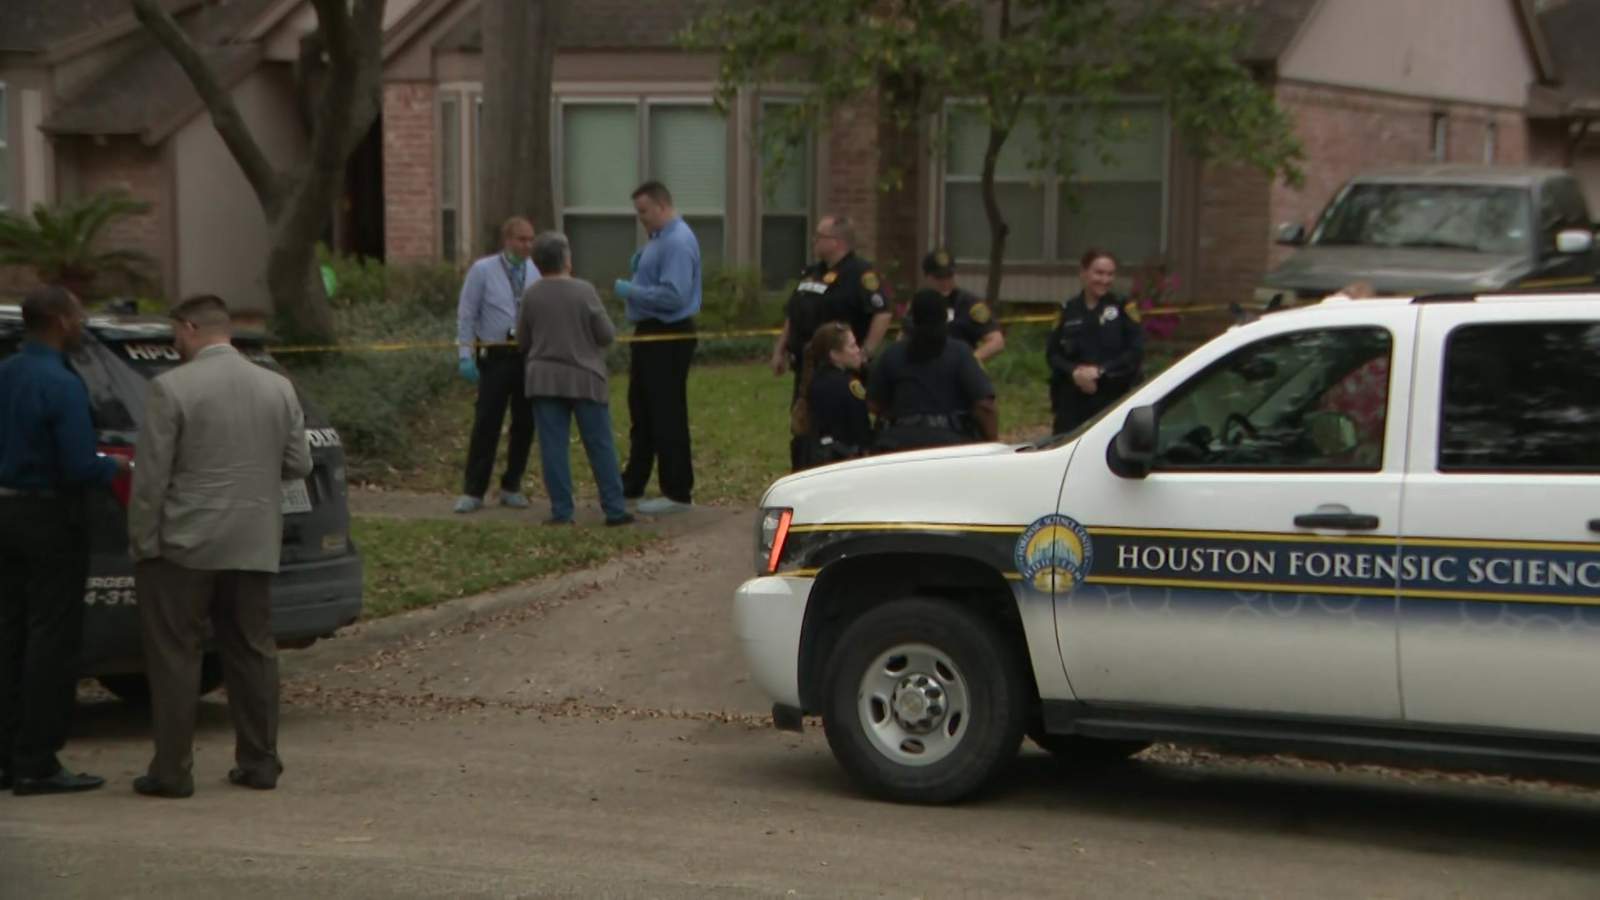 Elderly couple found dead in apparent murder-suicide at home in Clear Lake area, police say